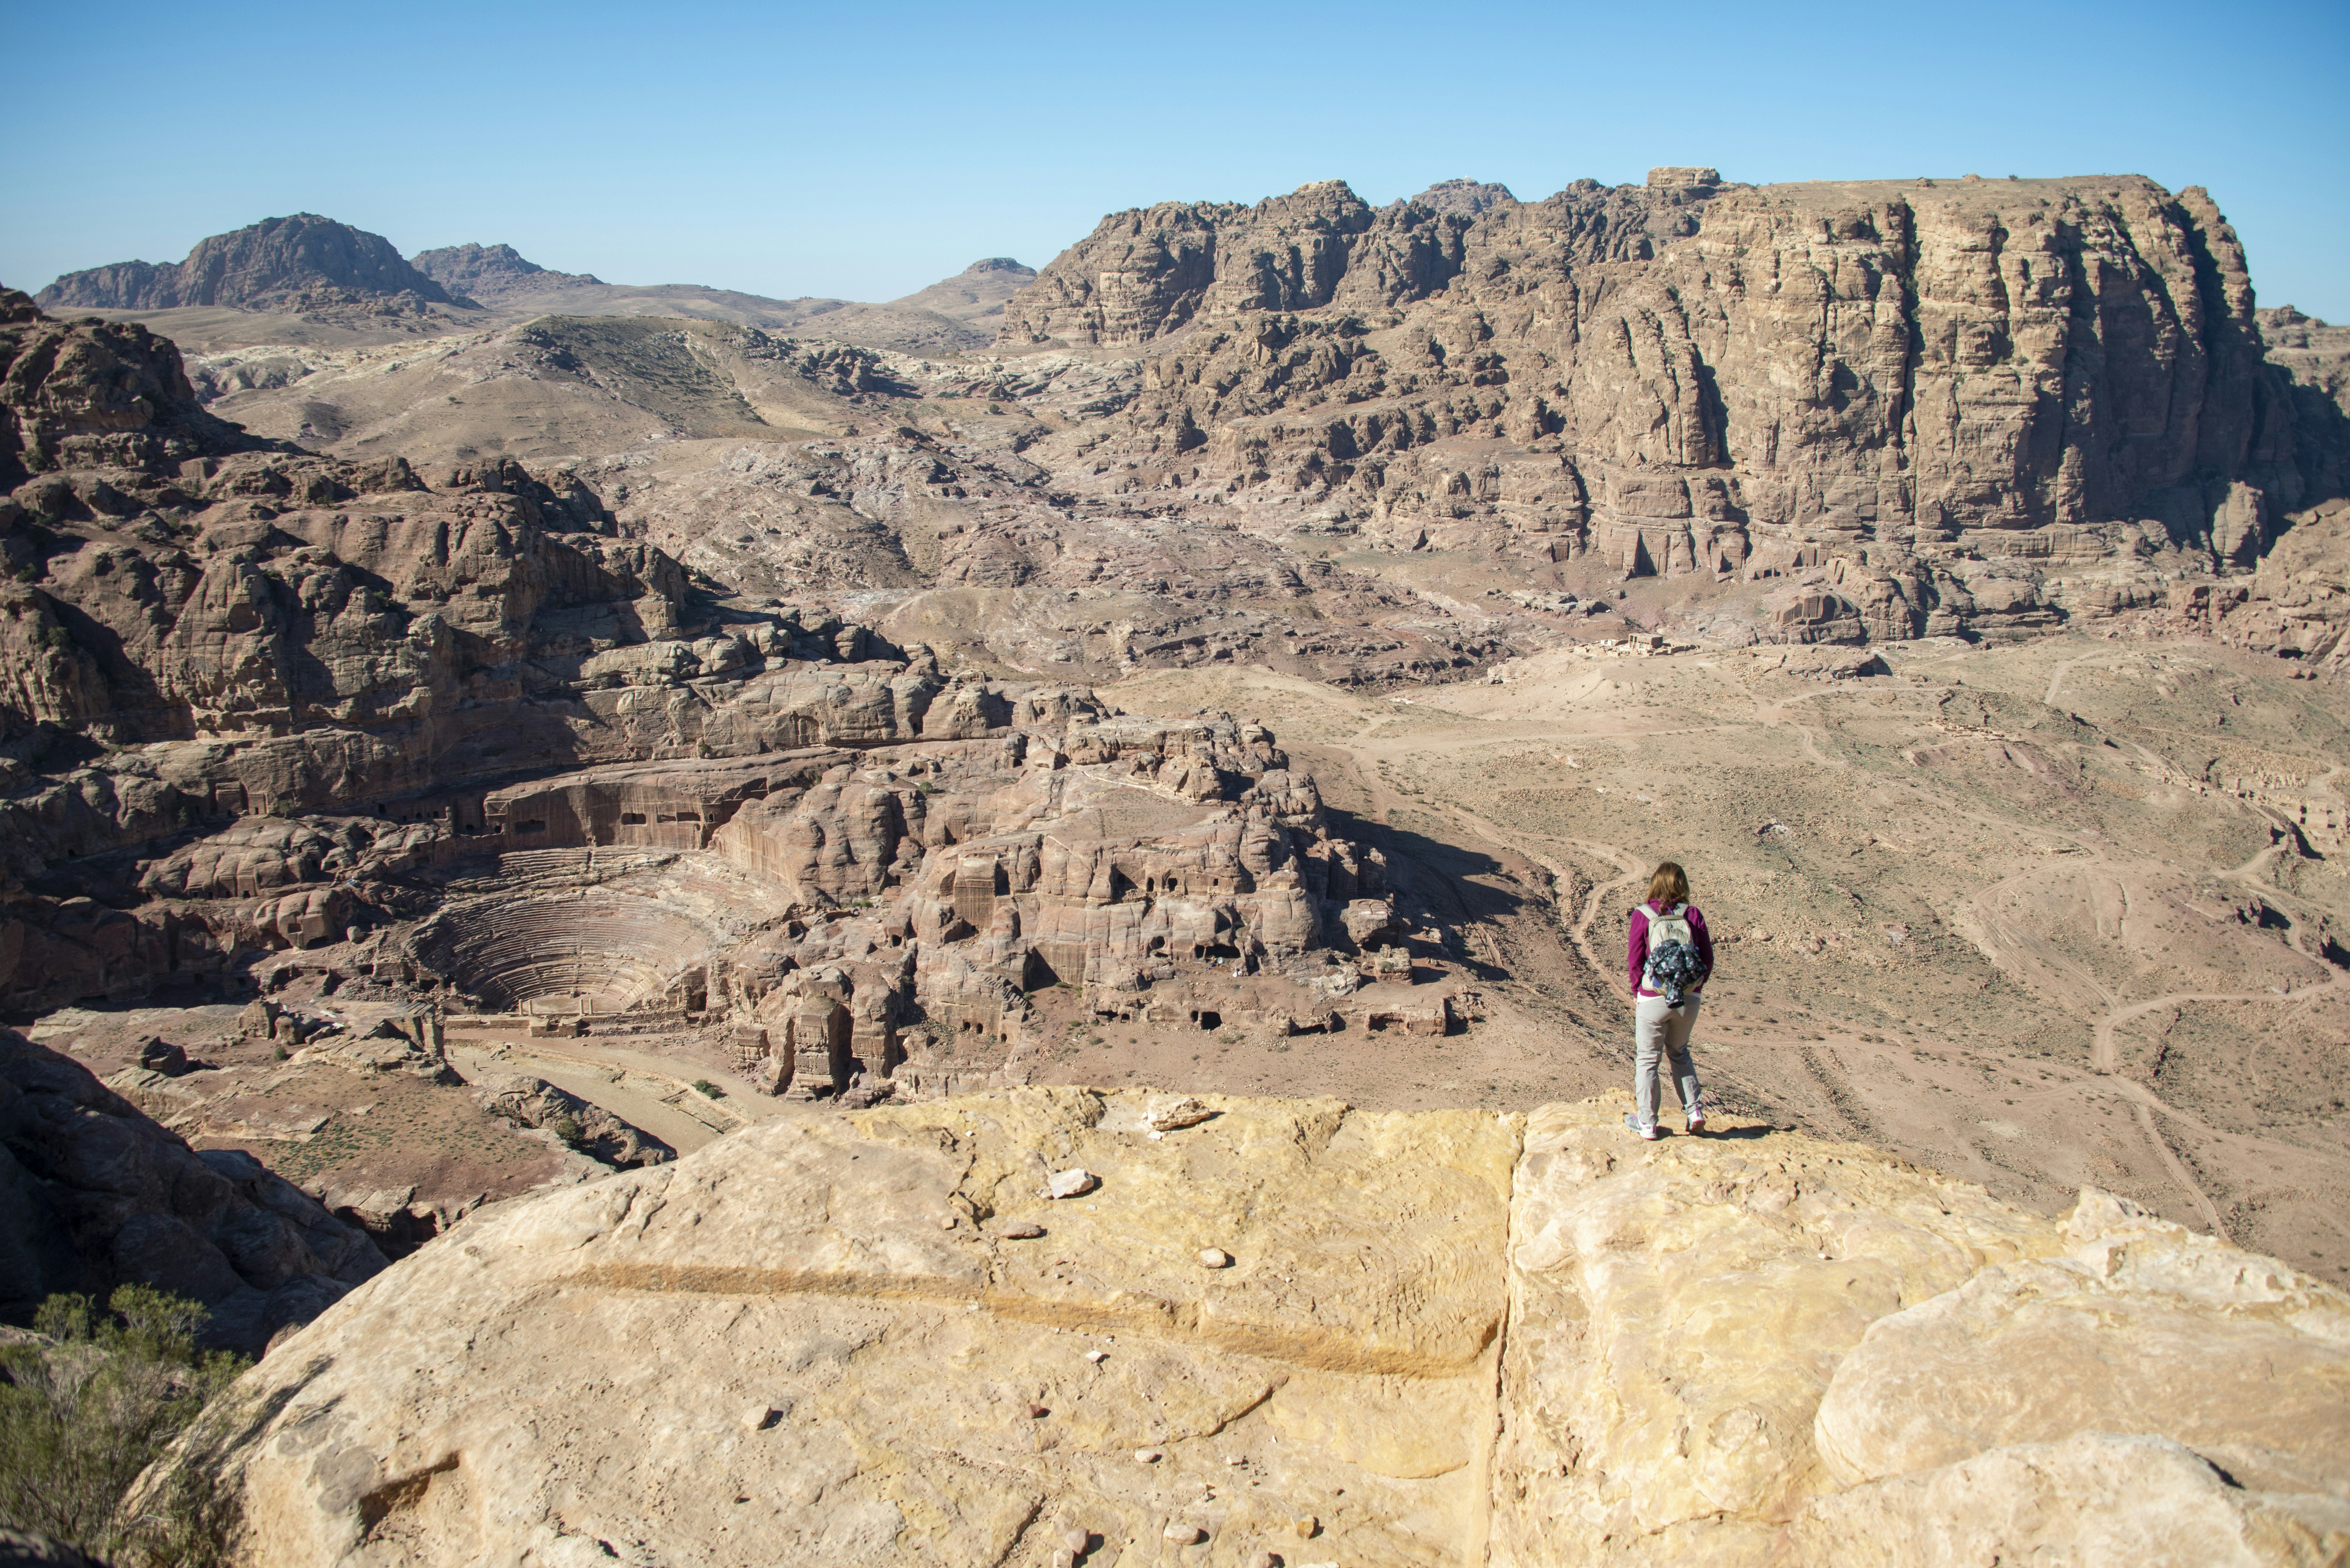 A woman in grey pants and a pink shirt with a grey backpack stands on a rocky overlook with an expansive view of the Nabatean theater in the Petra valley along the Jordan Trail